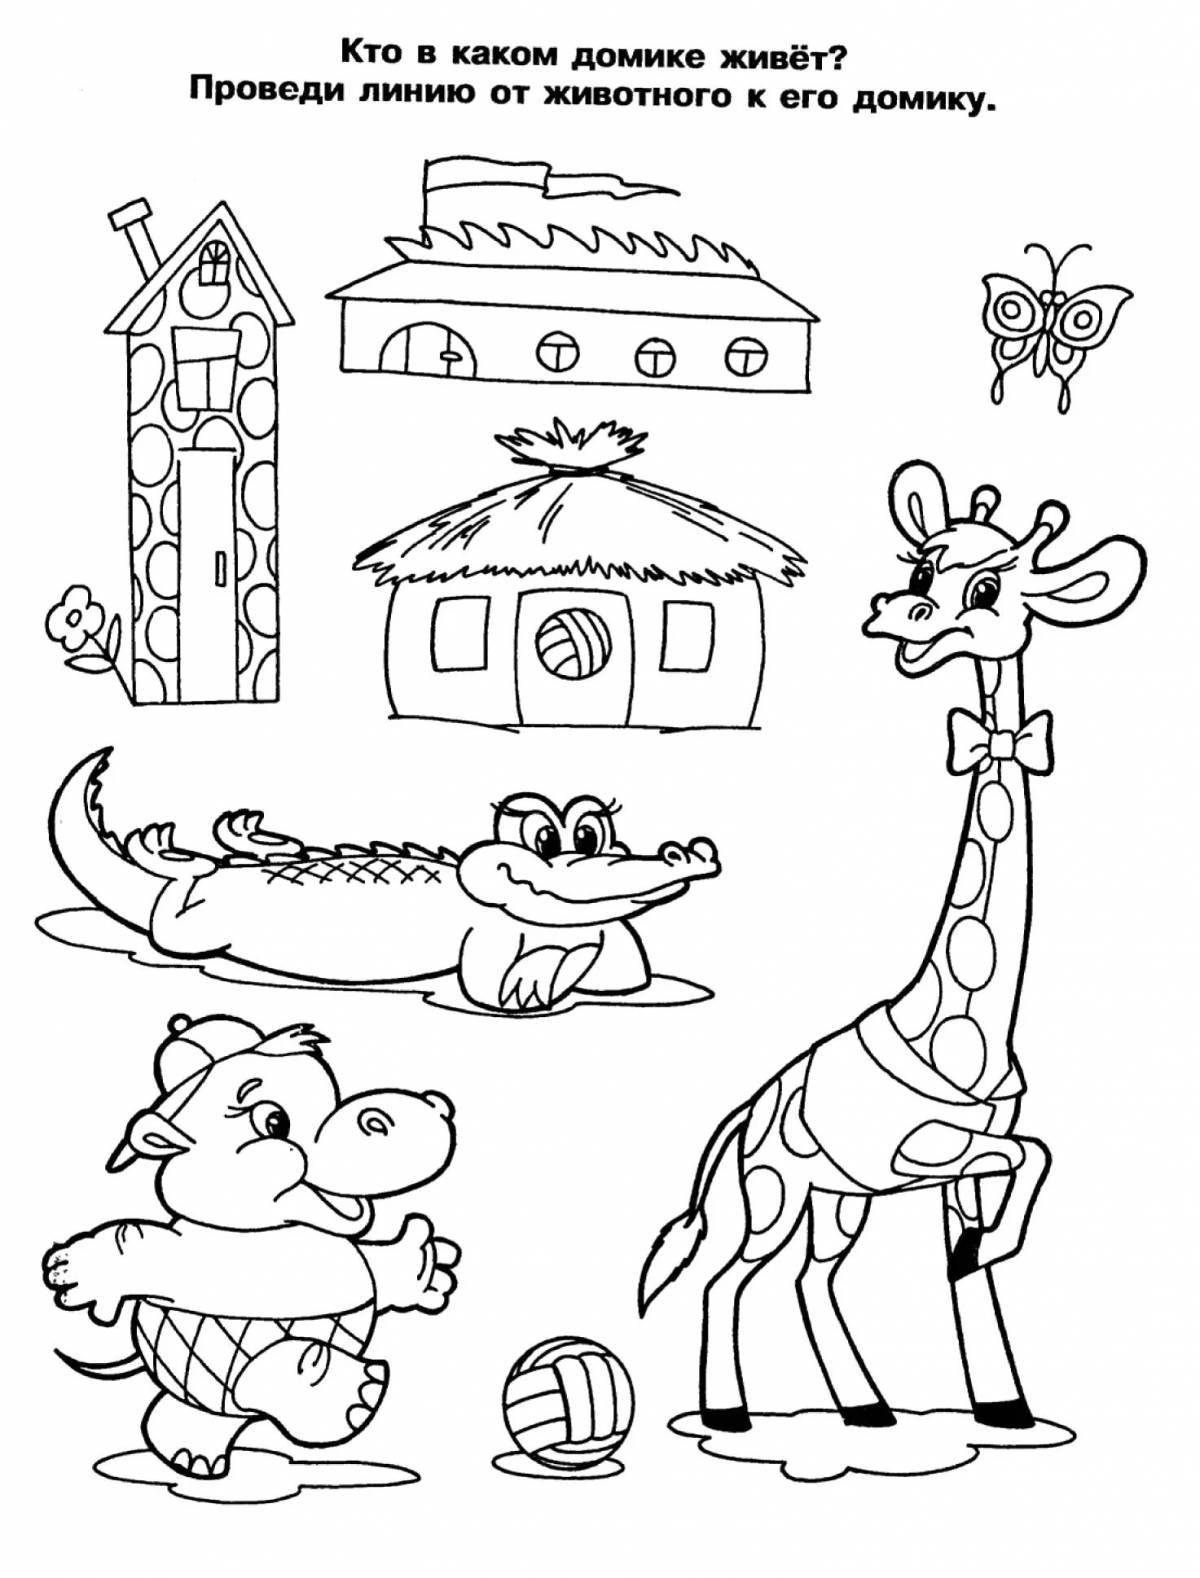 Funny children's educational coloring book